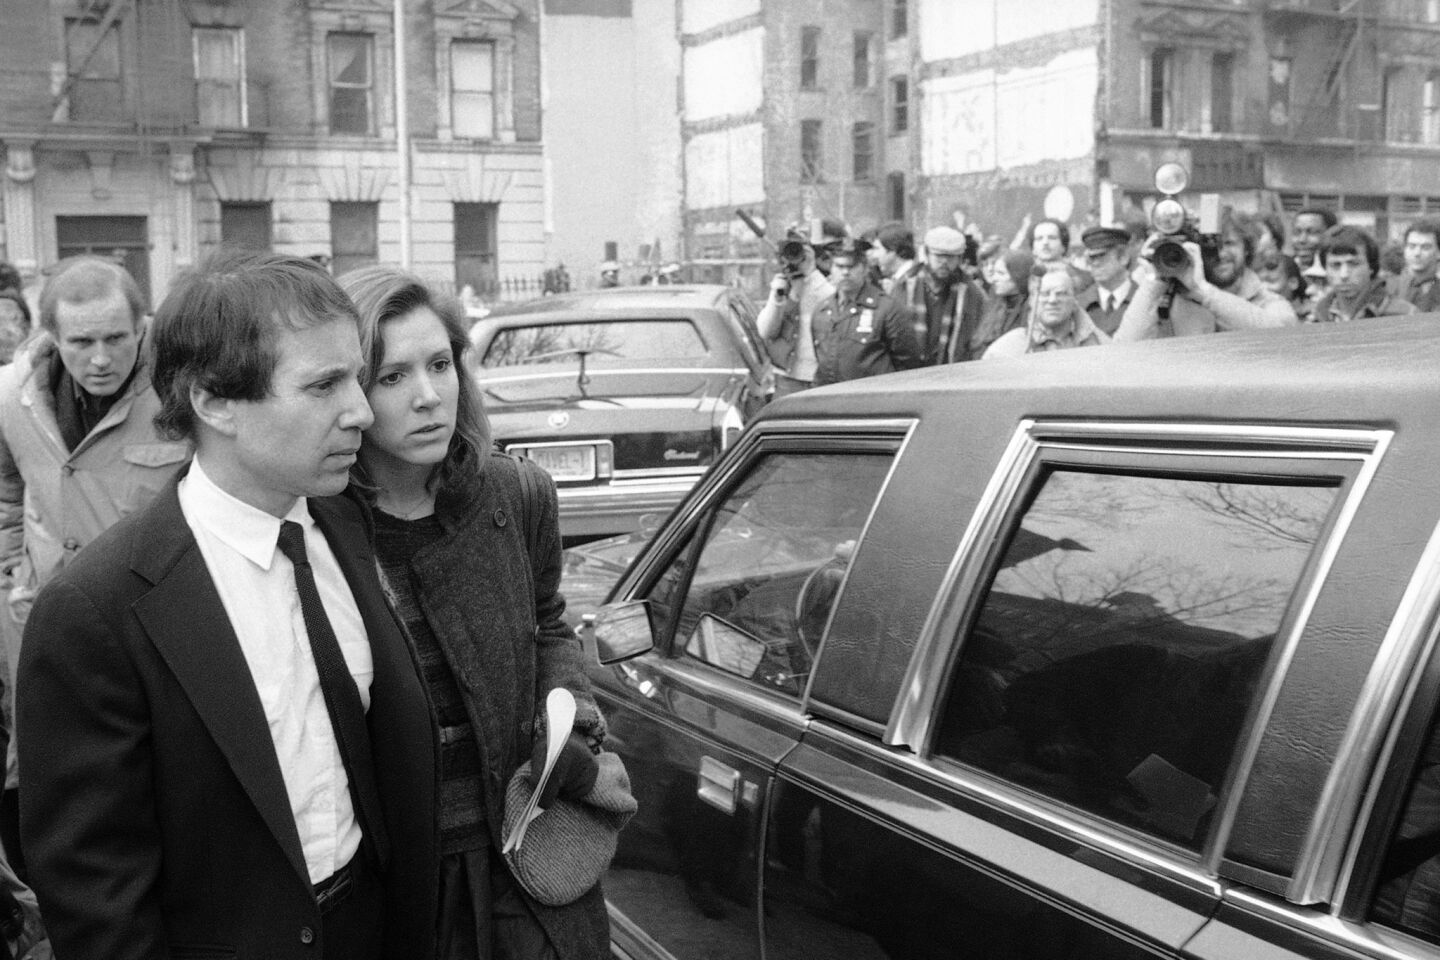 Singer-composer Paul Simon and actress Carrie Fisher leave the Cathedral of St. John the Divine in New York City, after a memorial service for comedian John Belushi.